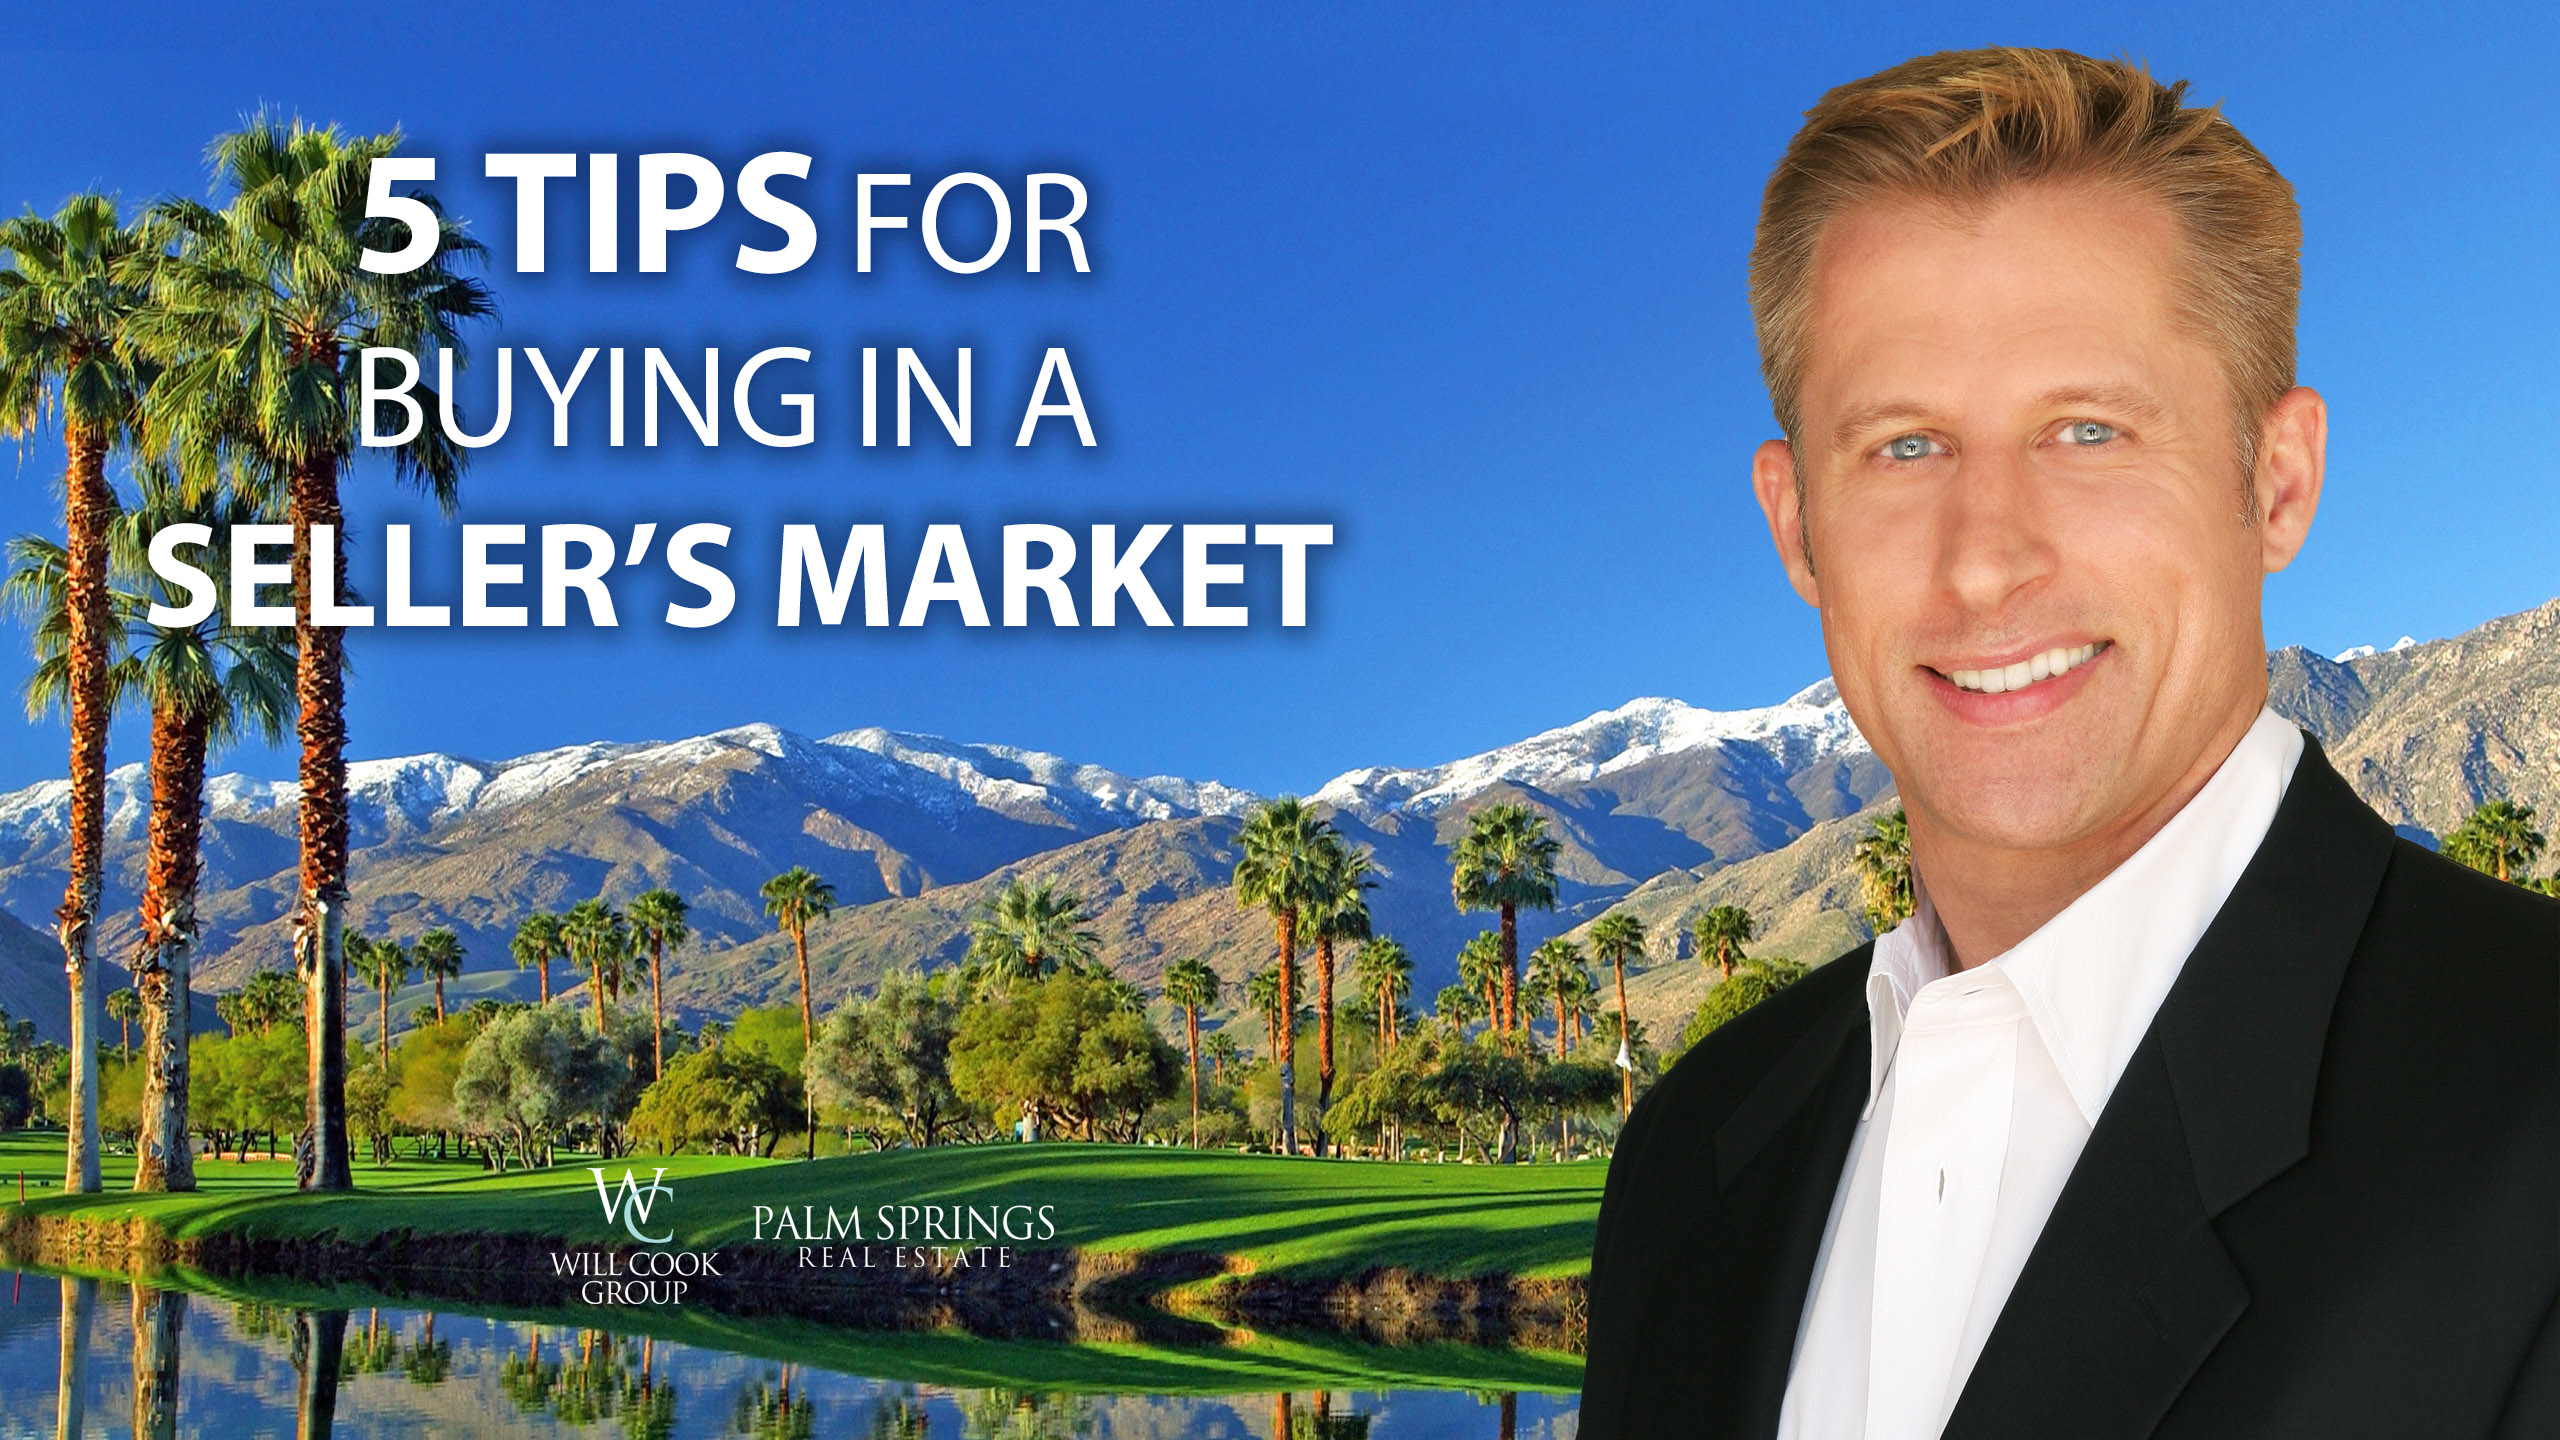 5 Tips For Buying in a Seller’s Market